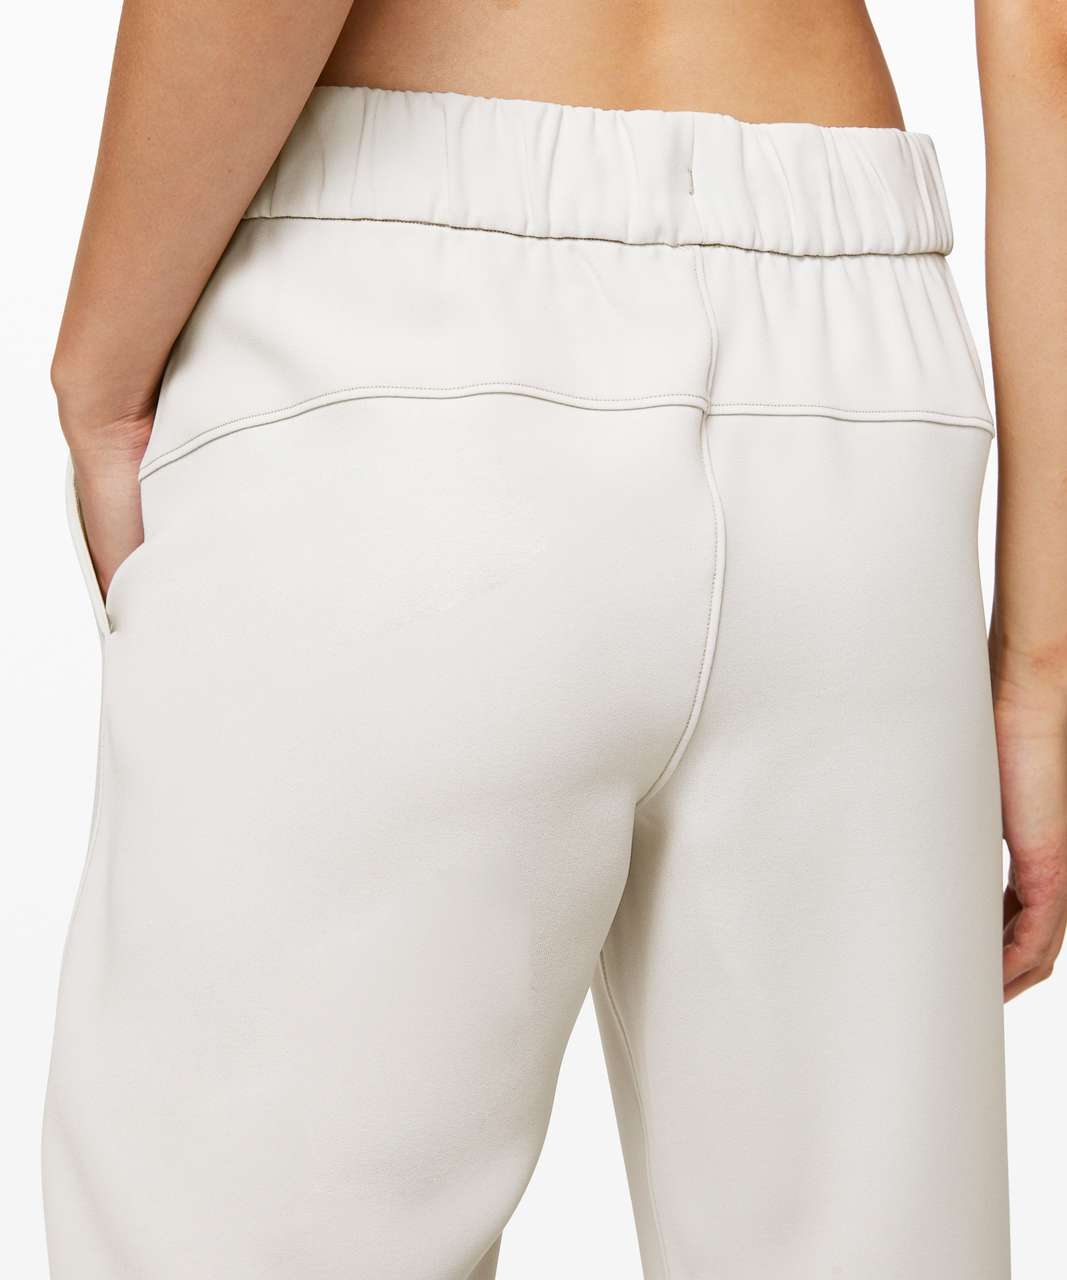 Lululemon On the Fly 7/8 Pant *Woven - Silverstone